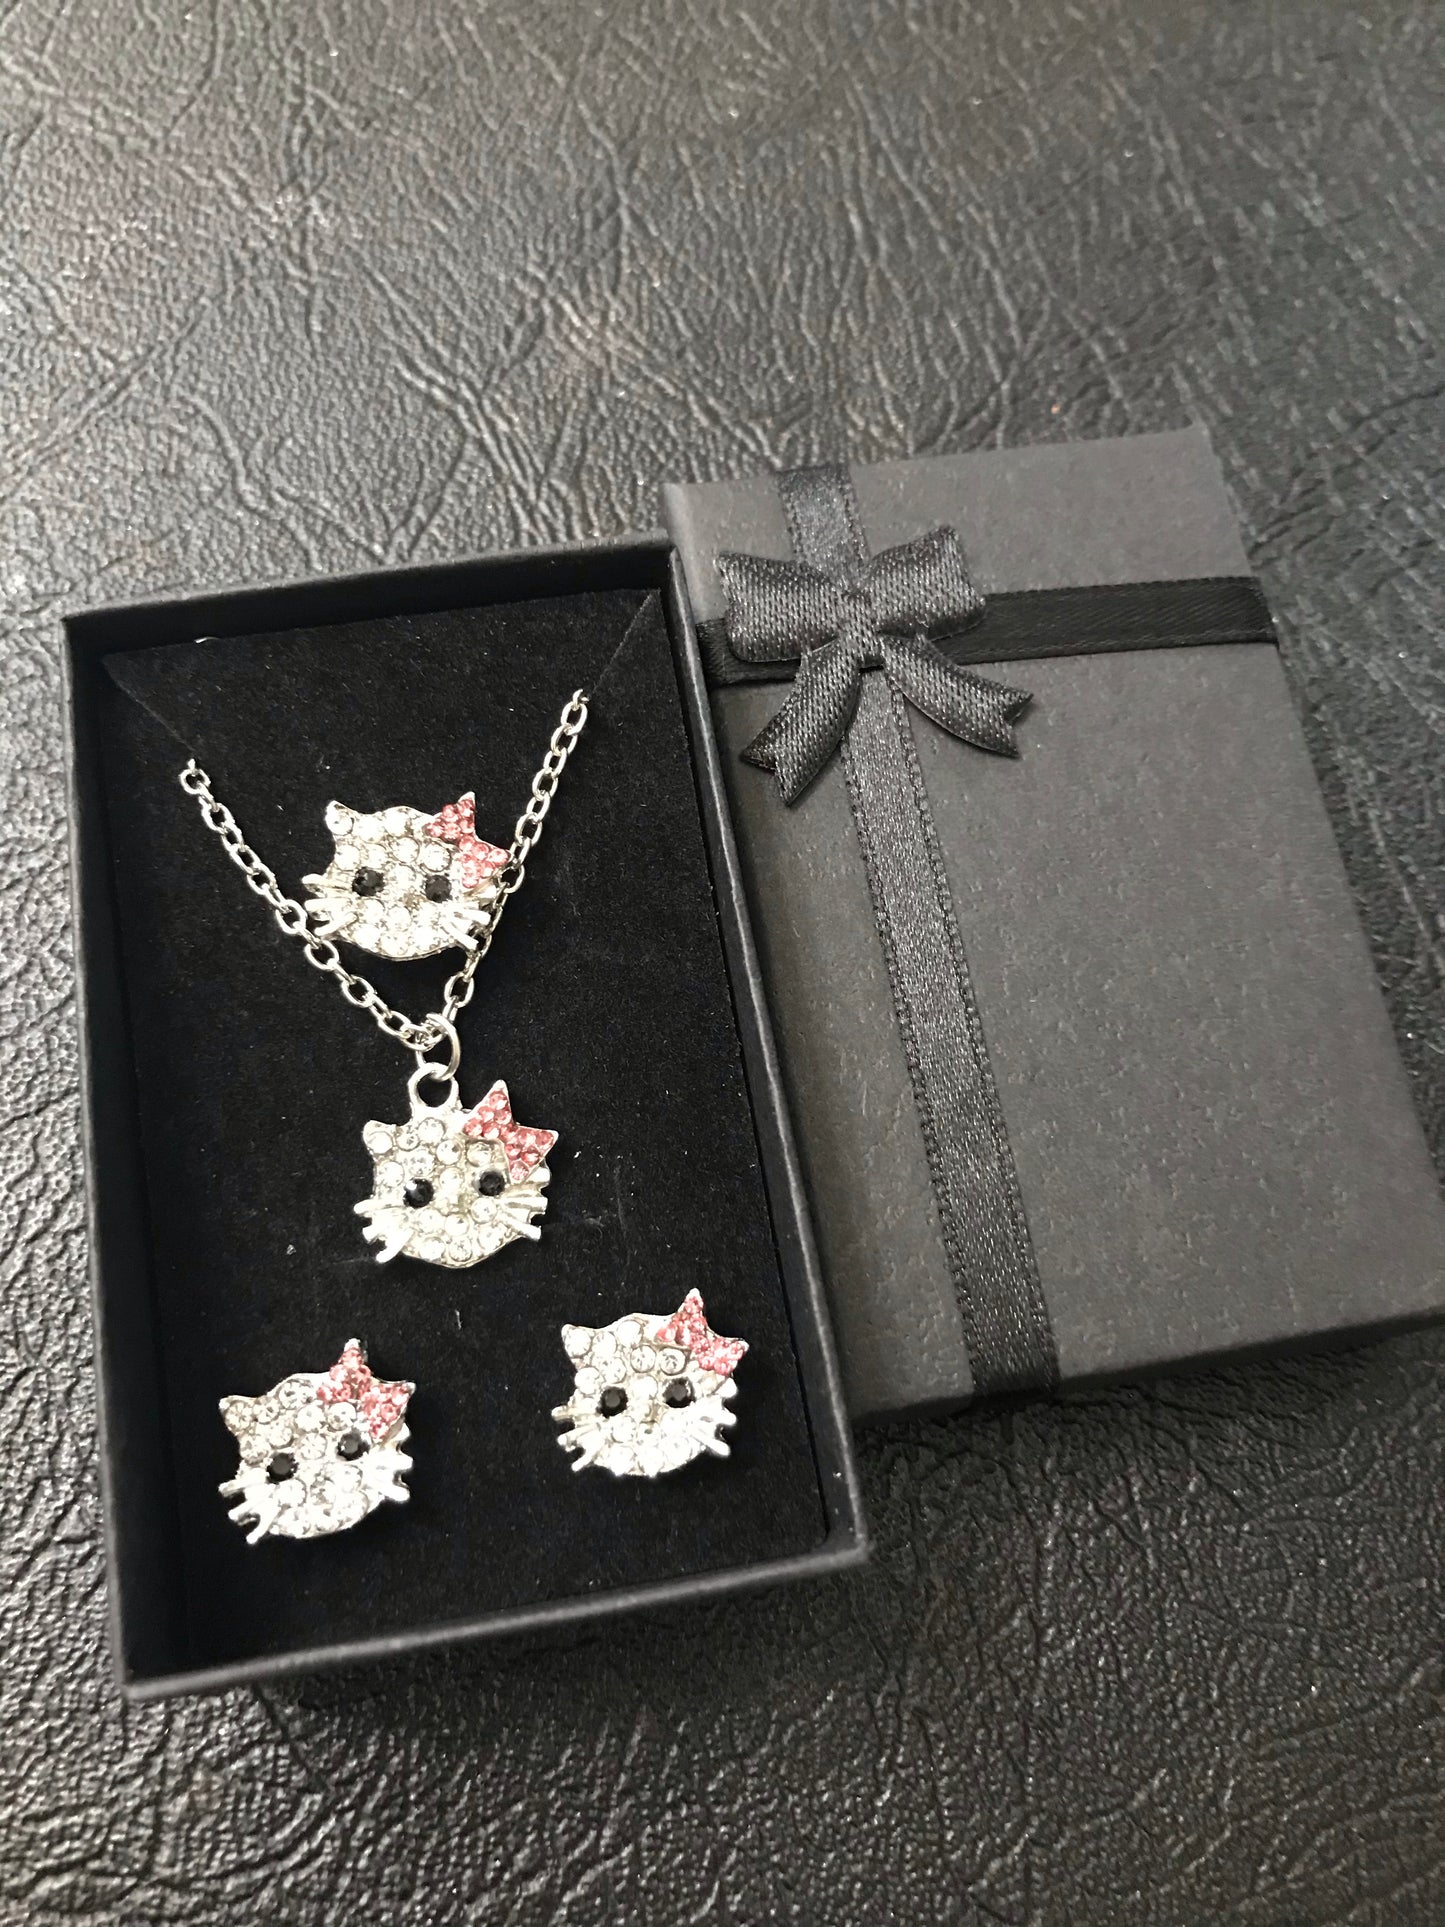 hello kitty necklace earrings ring complete jewelry set